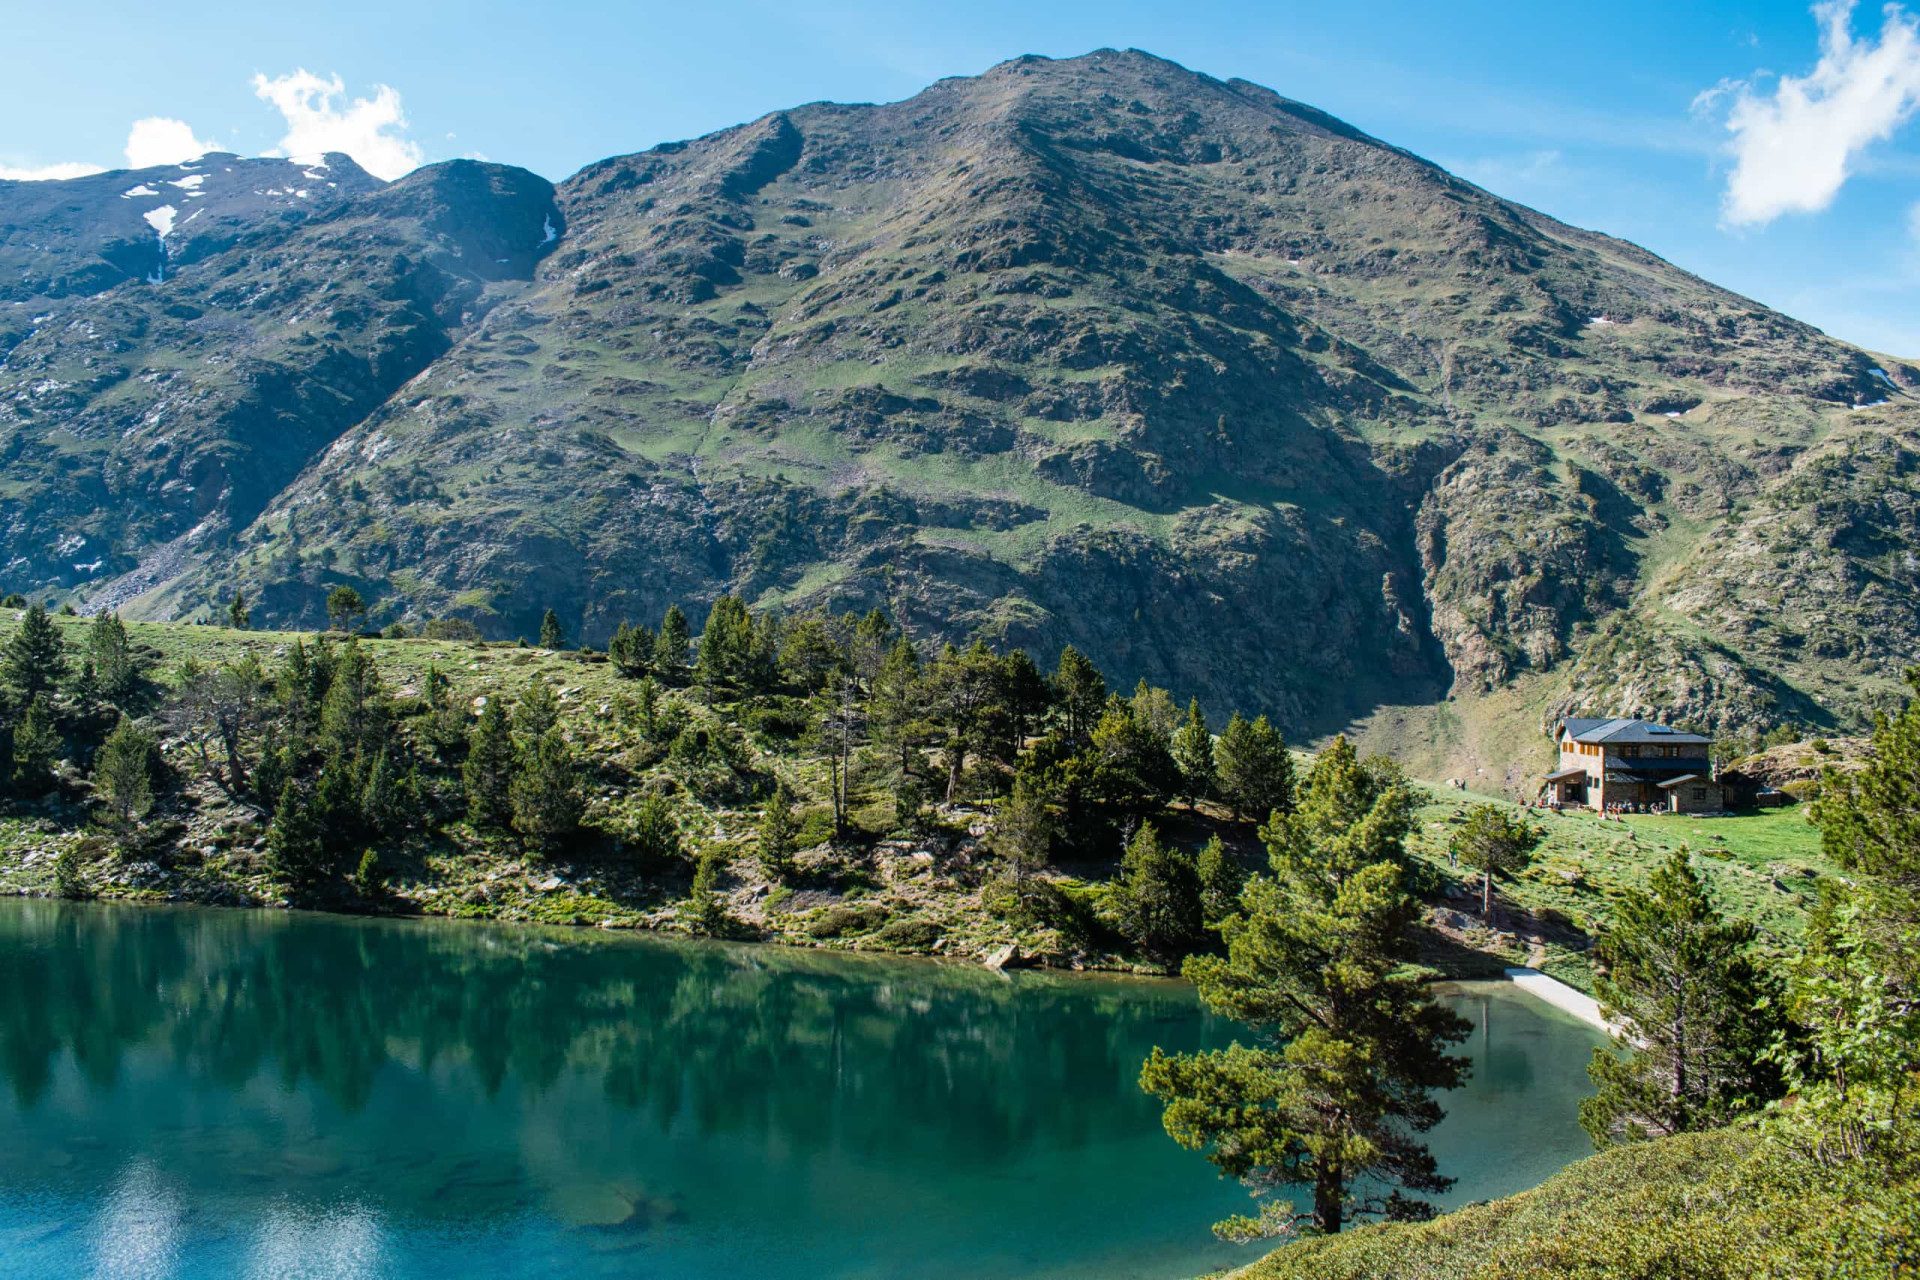 <p>For those who aren't afraid of a hike, hiking up to Estany de les Truites is a must. Near the Refugi de Comapedrosa, this glacial lake is a wonderful place for a swim and to take in the breathtaking views of the Pyrenees.</p><p><a href="https://www.msn.com/en-za/community/channel/vid-7xx8mnucu55yw63we9va2gwr7uihbxwc68fxqp25x6tg4ftibpra?cvid=94631541bc0f4f89bfd59158d696ad7e">Follow us and access great exclusive content every day</a></p>